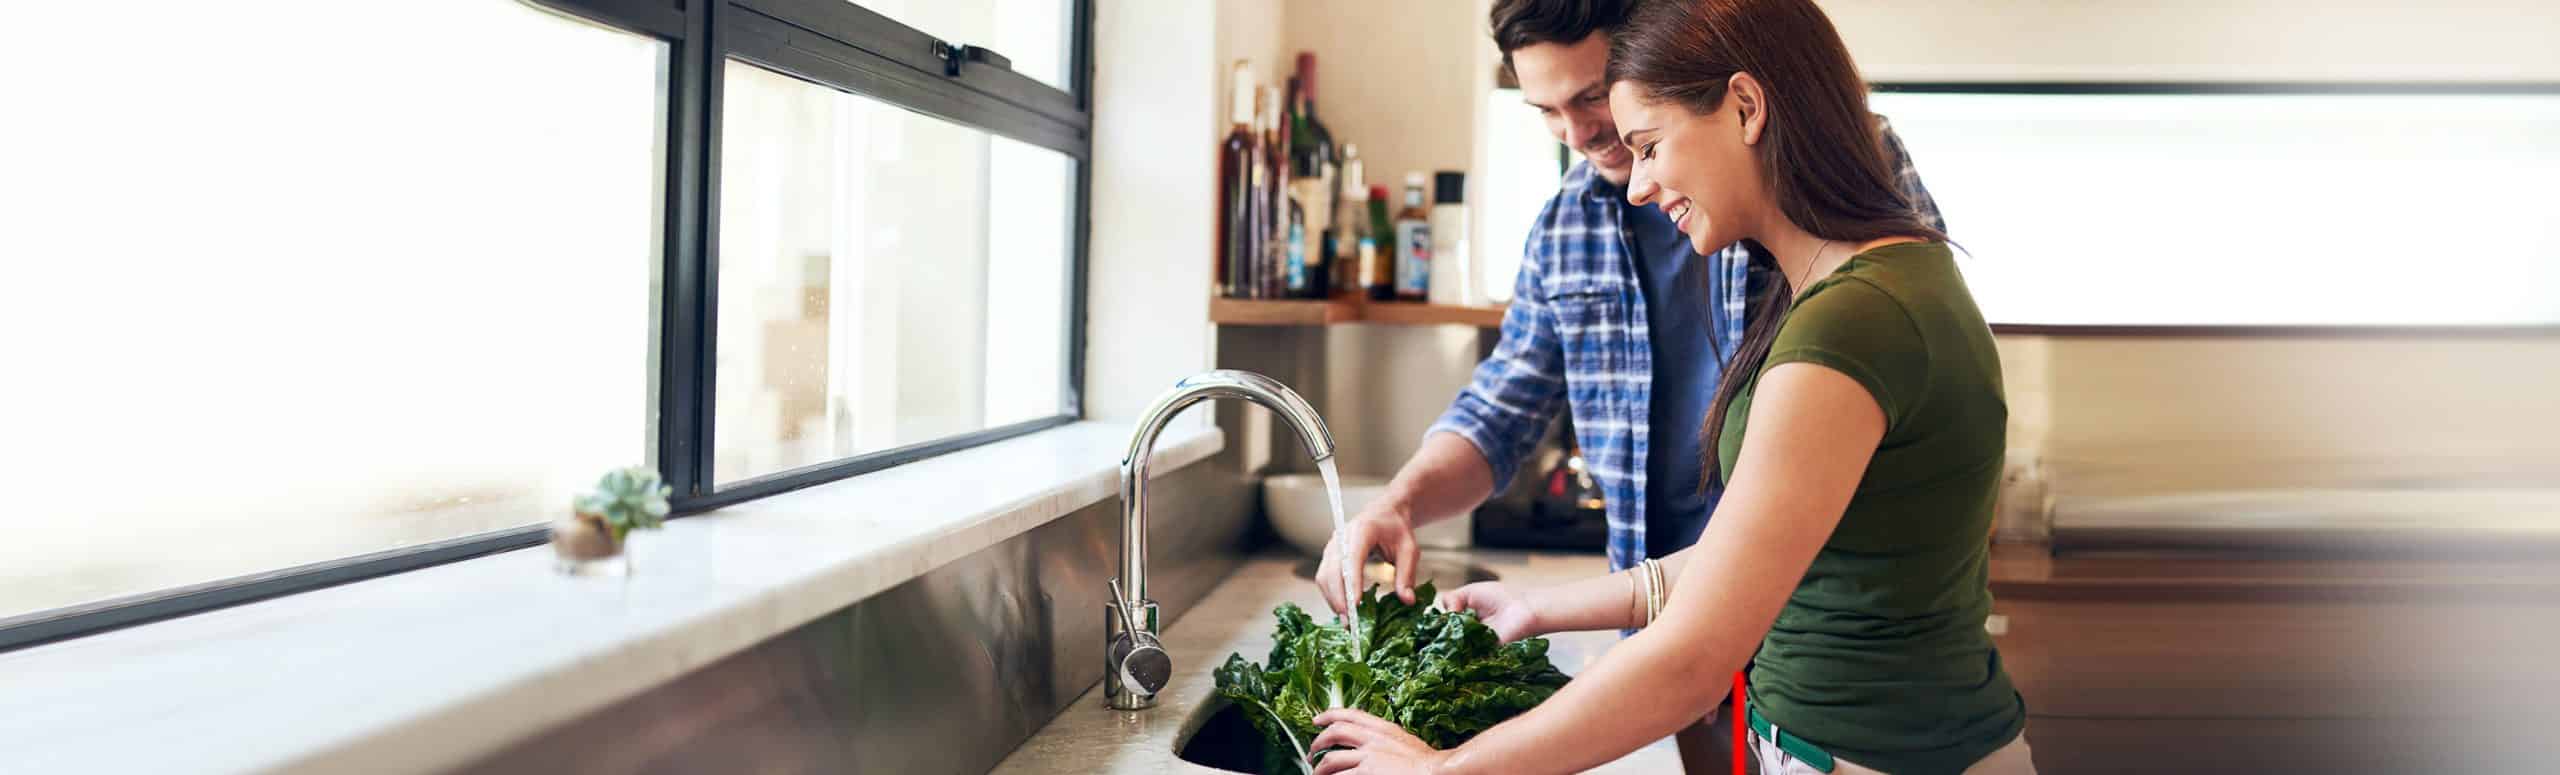 Couple in the kitchen washing lettuce in the sink while smiling together